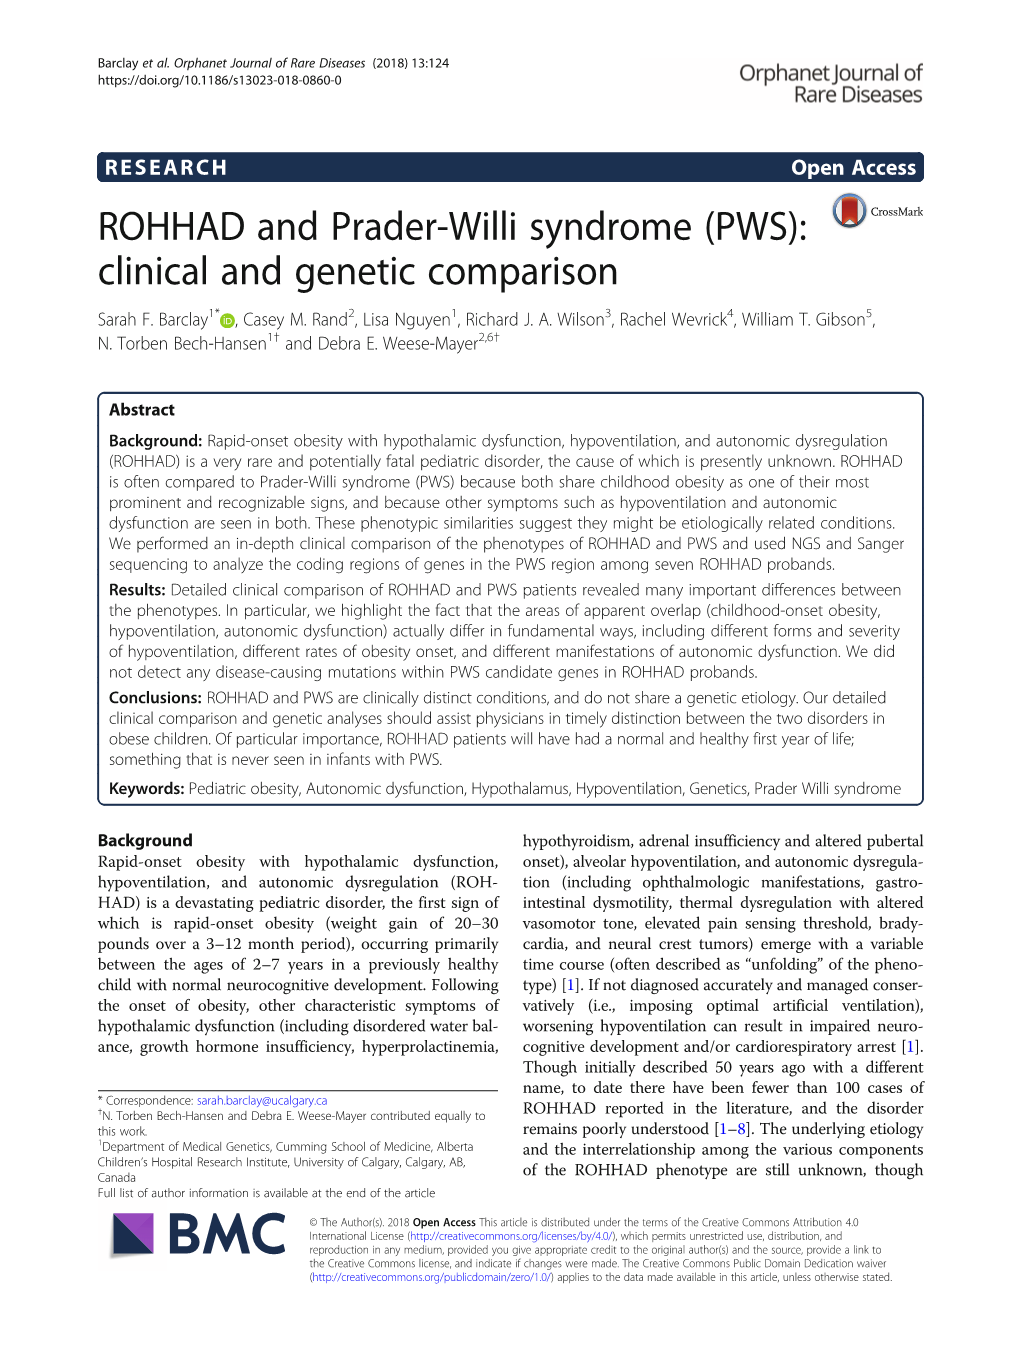 ROHHAD and Prader-Willi Syndrome (PWS): Clinical and Genetic Comparison Sarah F